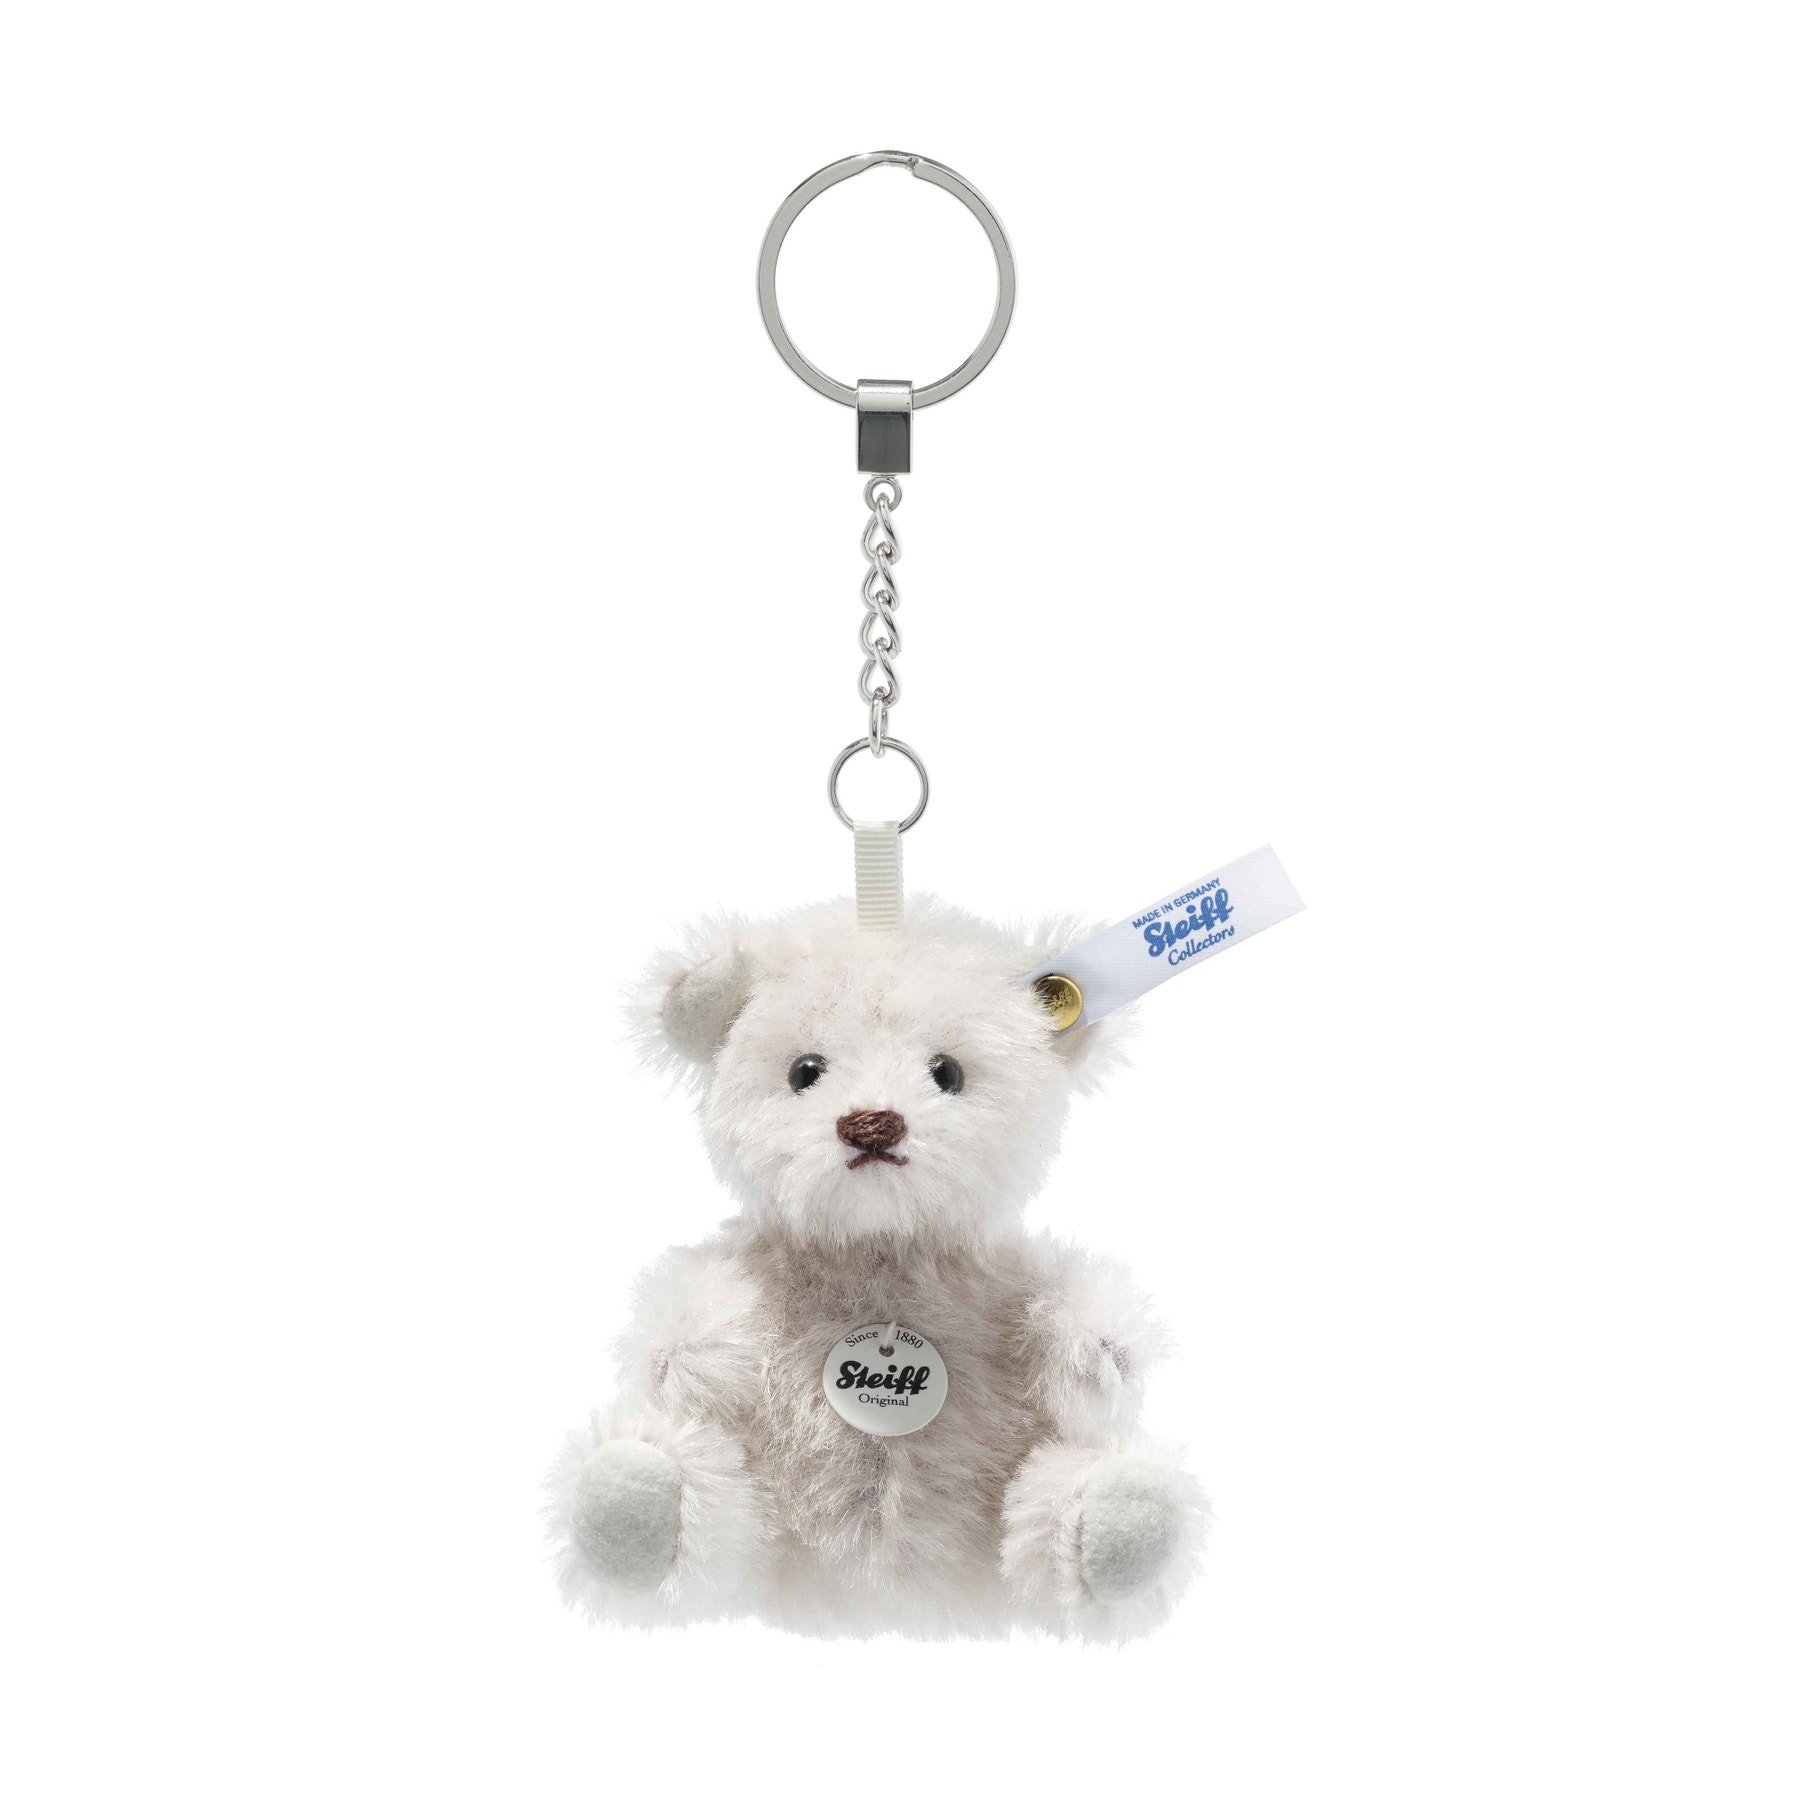 Pendentif ours Teddy miniature